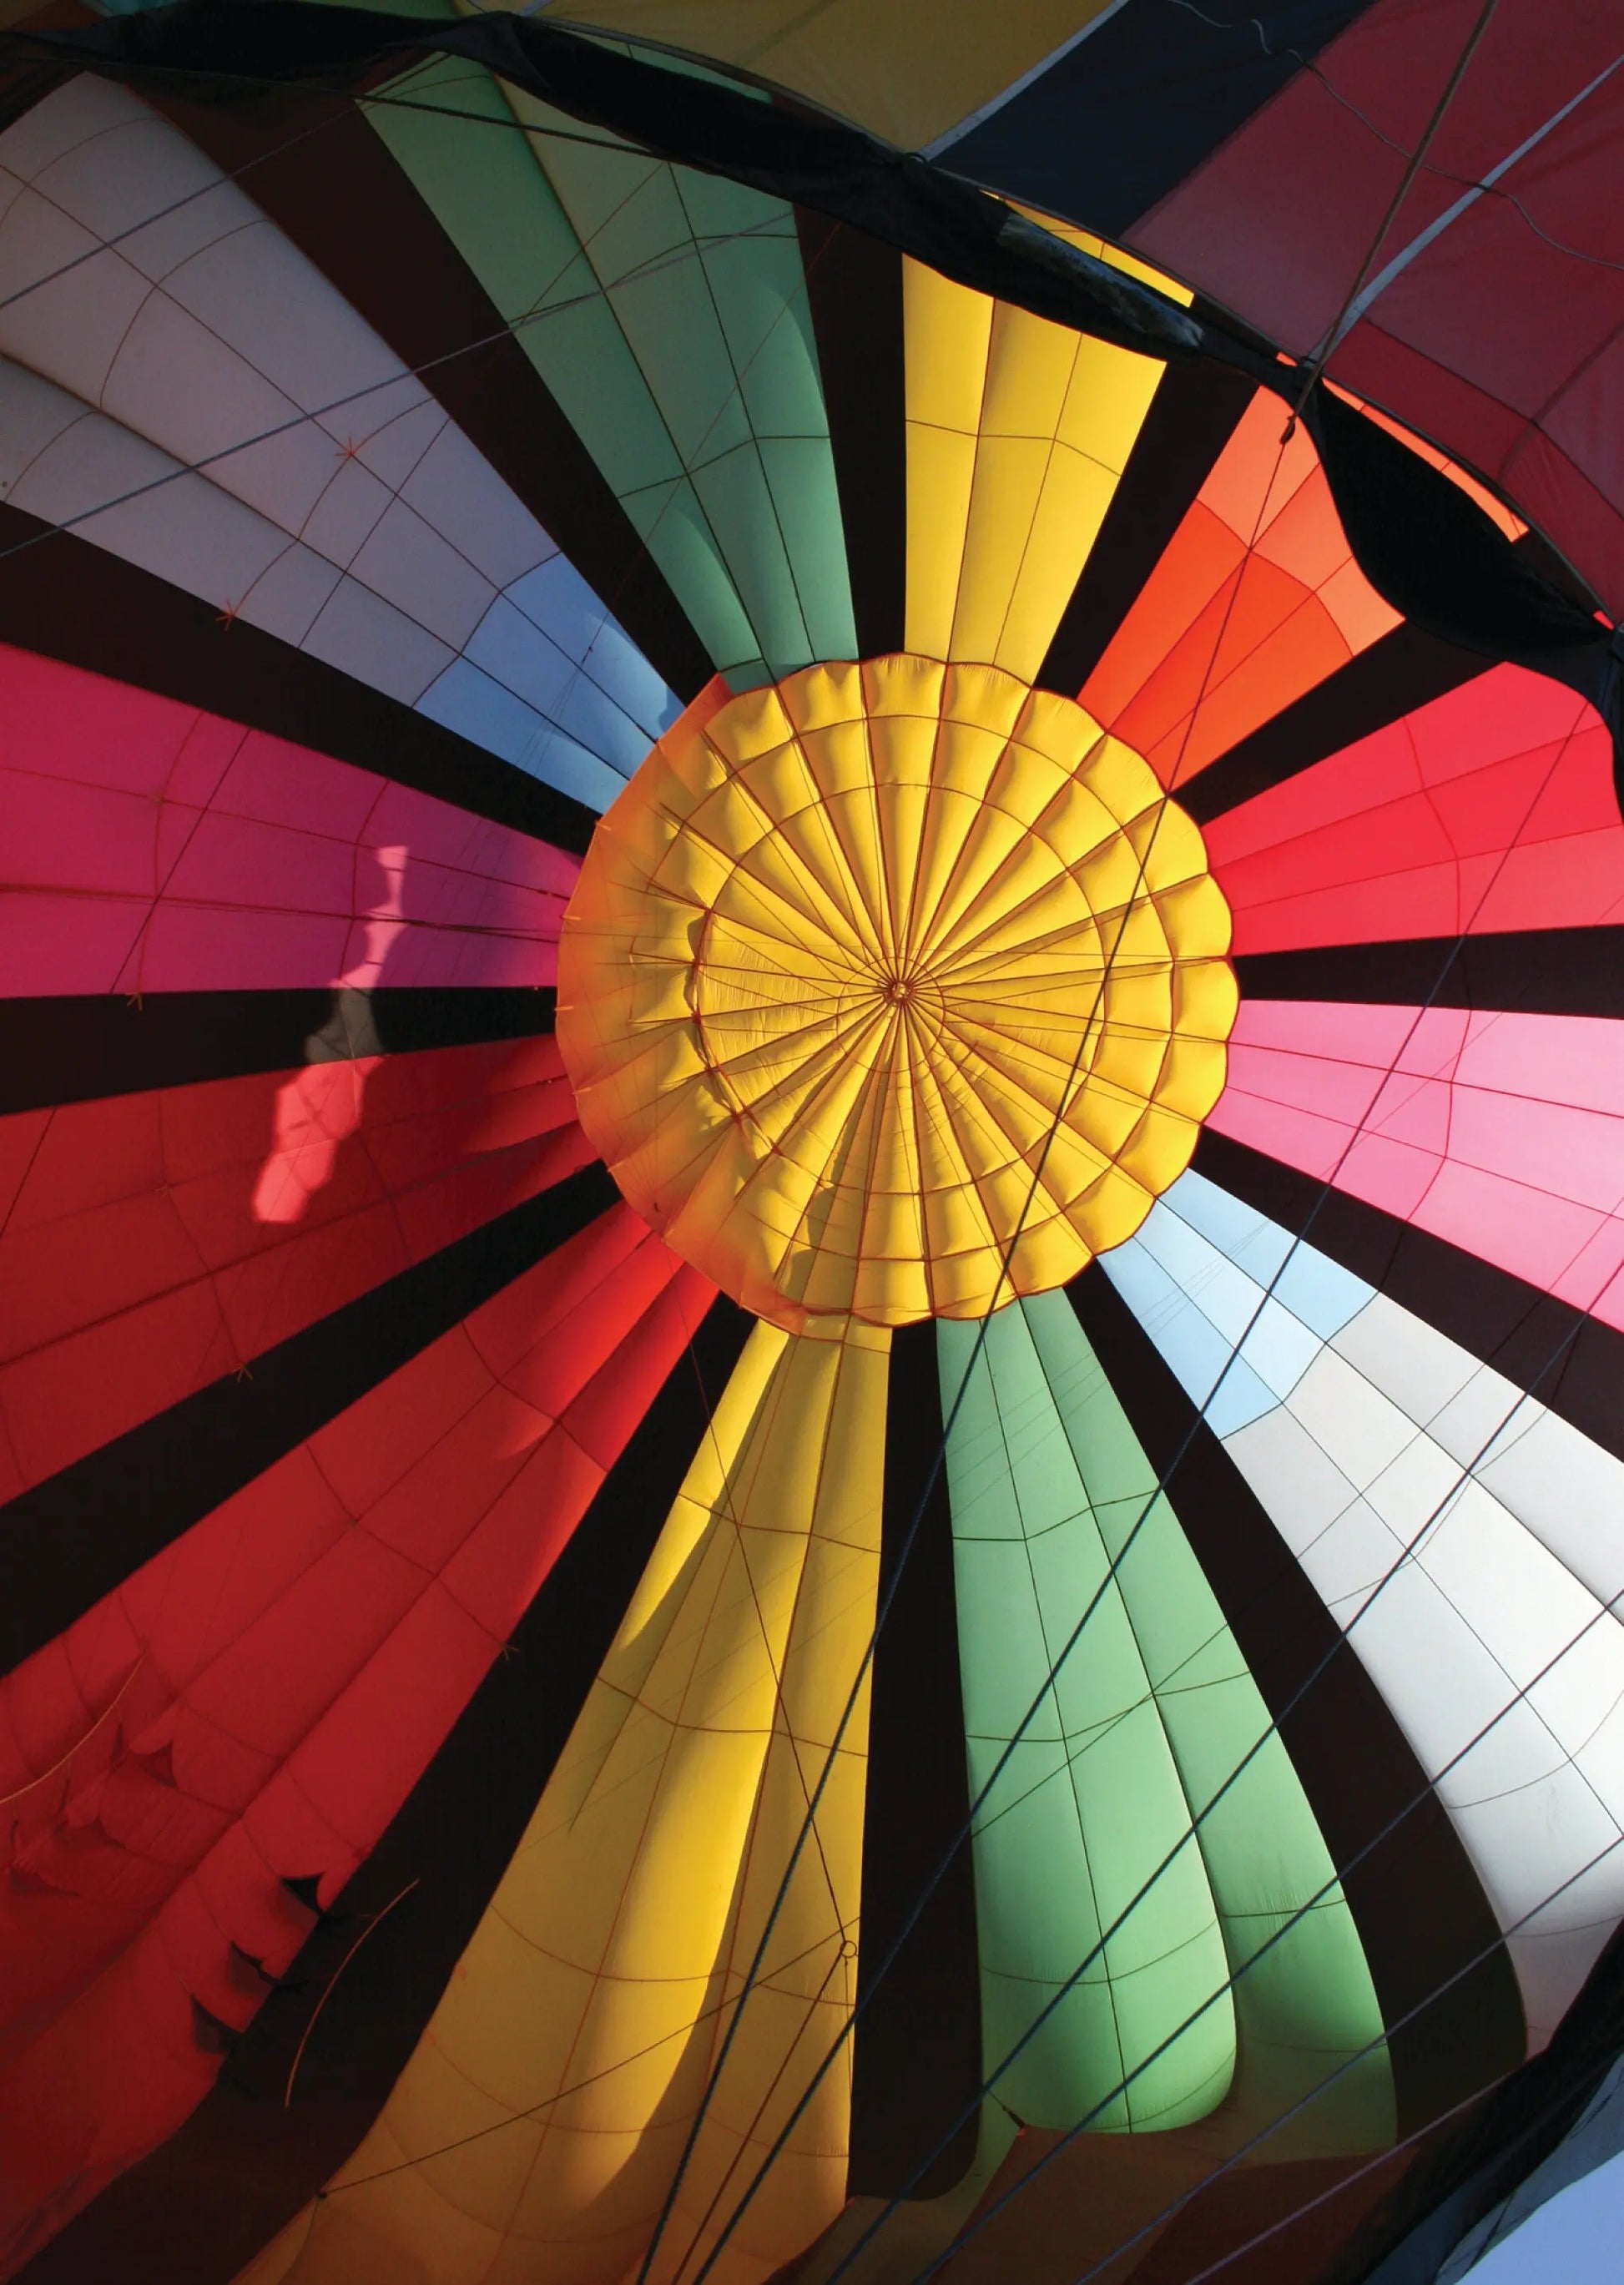 A photo of a colorful hot air balloon in the process of being inflated before a flight. The vibrant fabric of the balloon stretches out, showcasing a beautiful rainbow pattern.